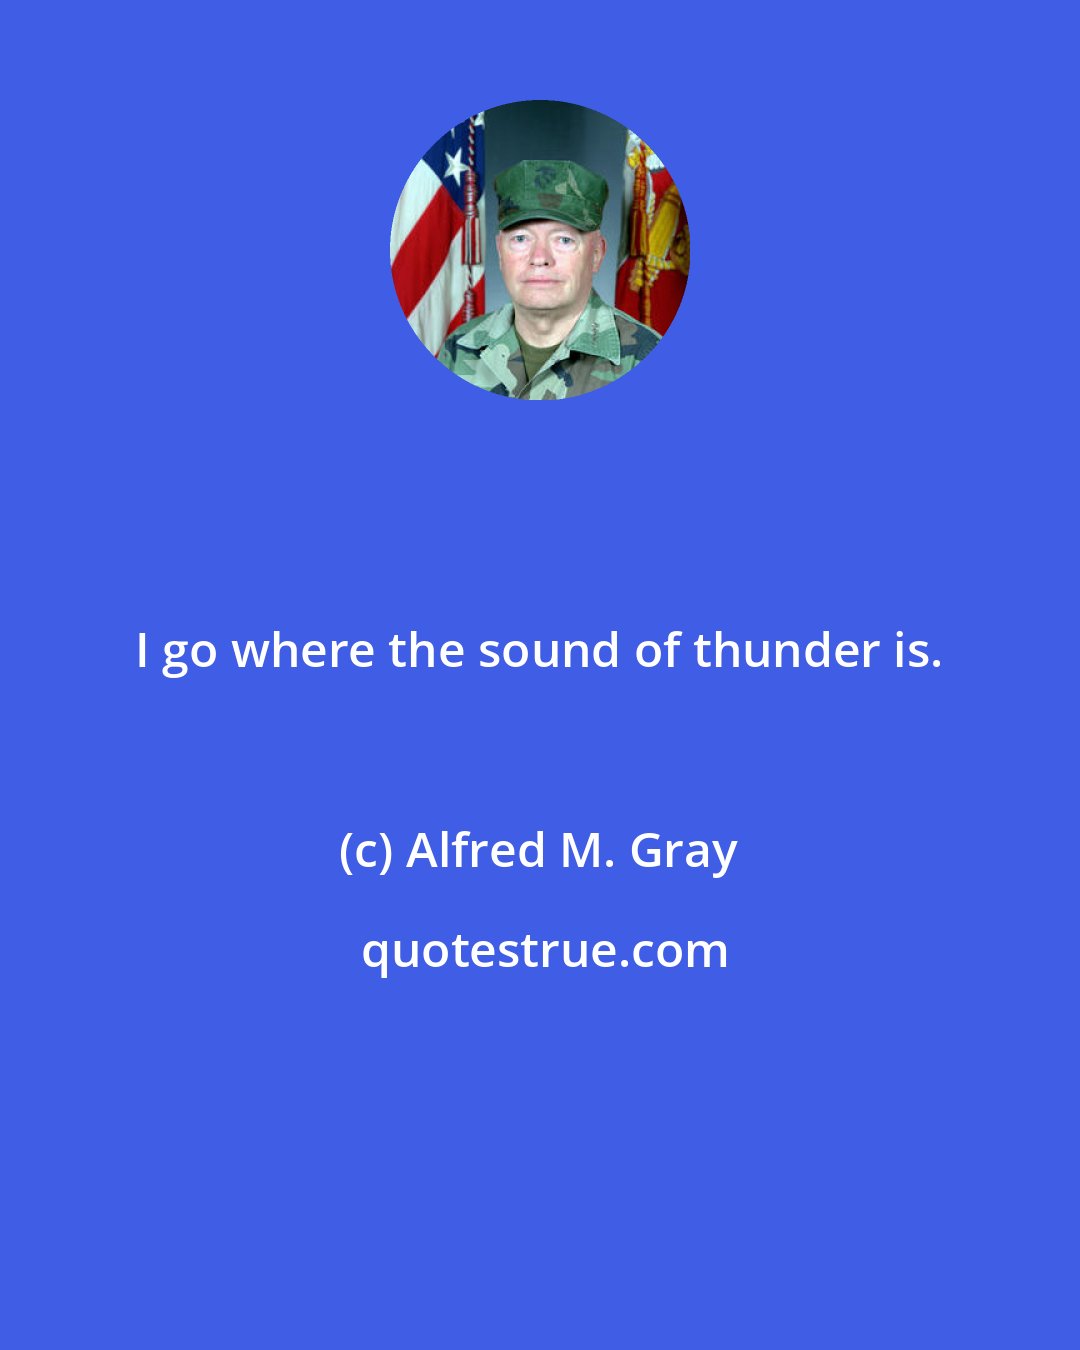 Alfred M. Gray: I go where the sound of thunder is.